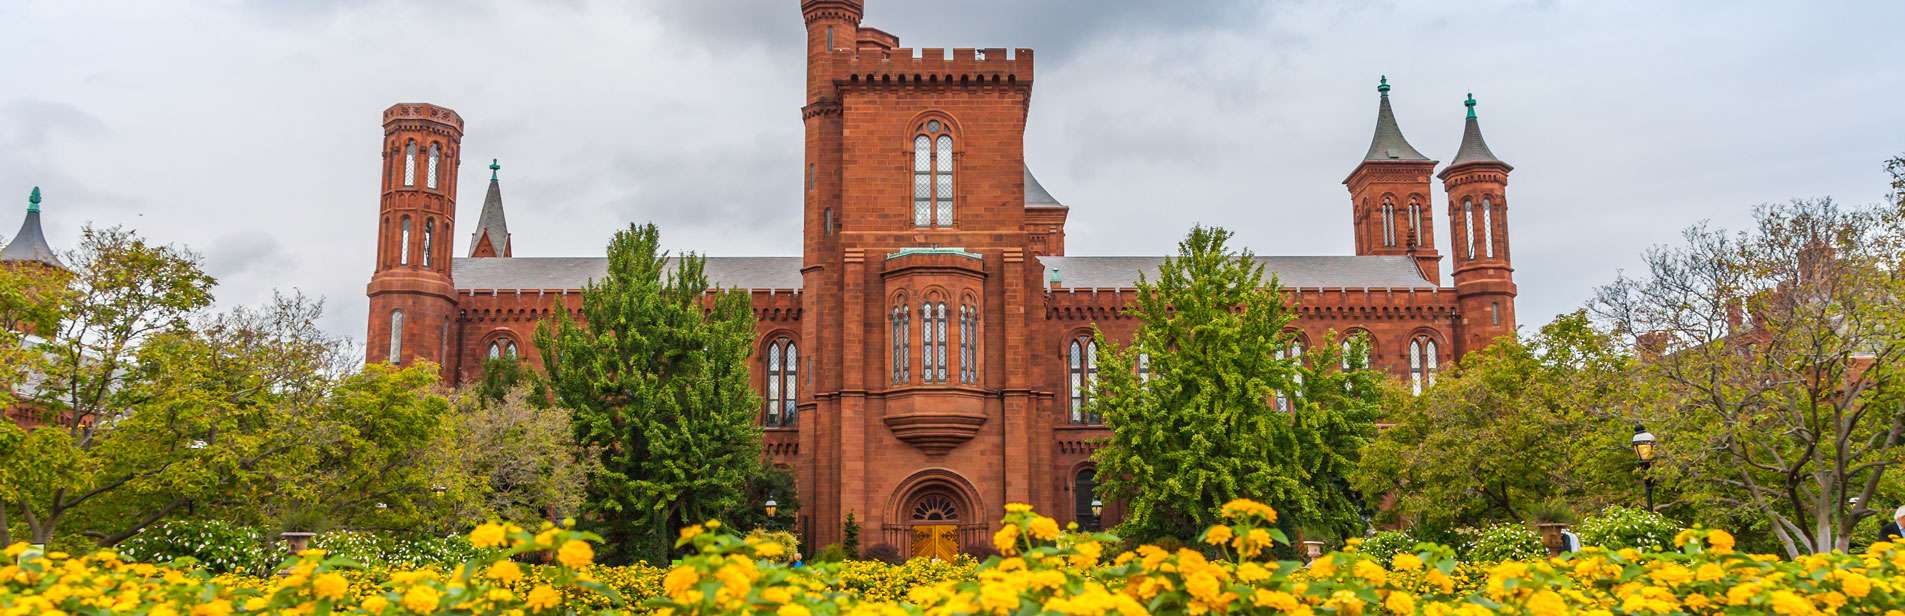 Hotels Near Smithsonian Museum of Natural History